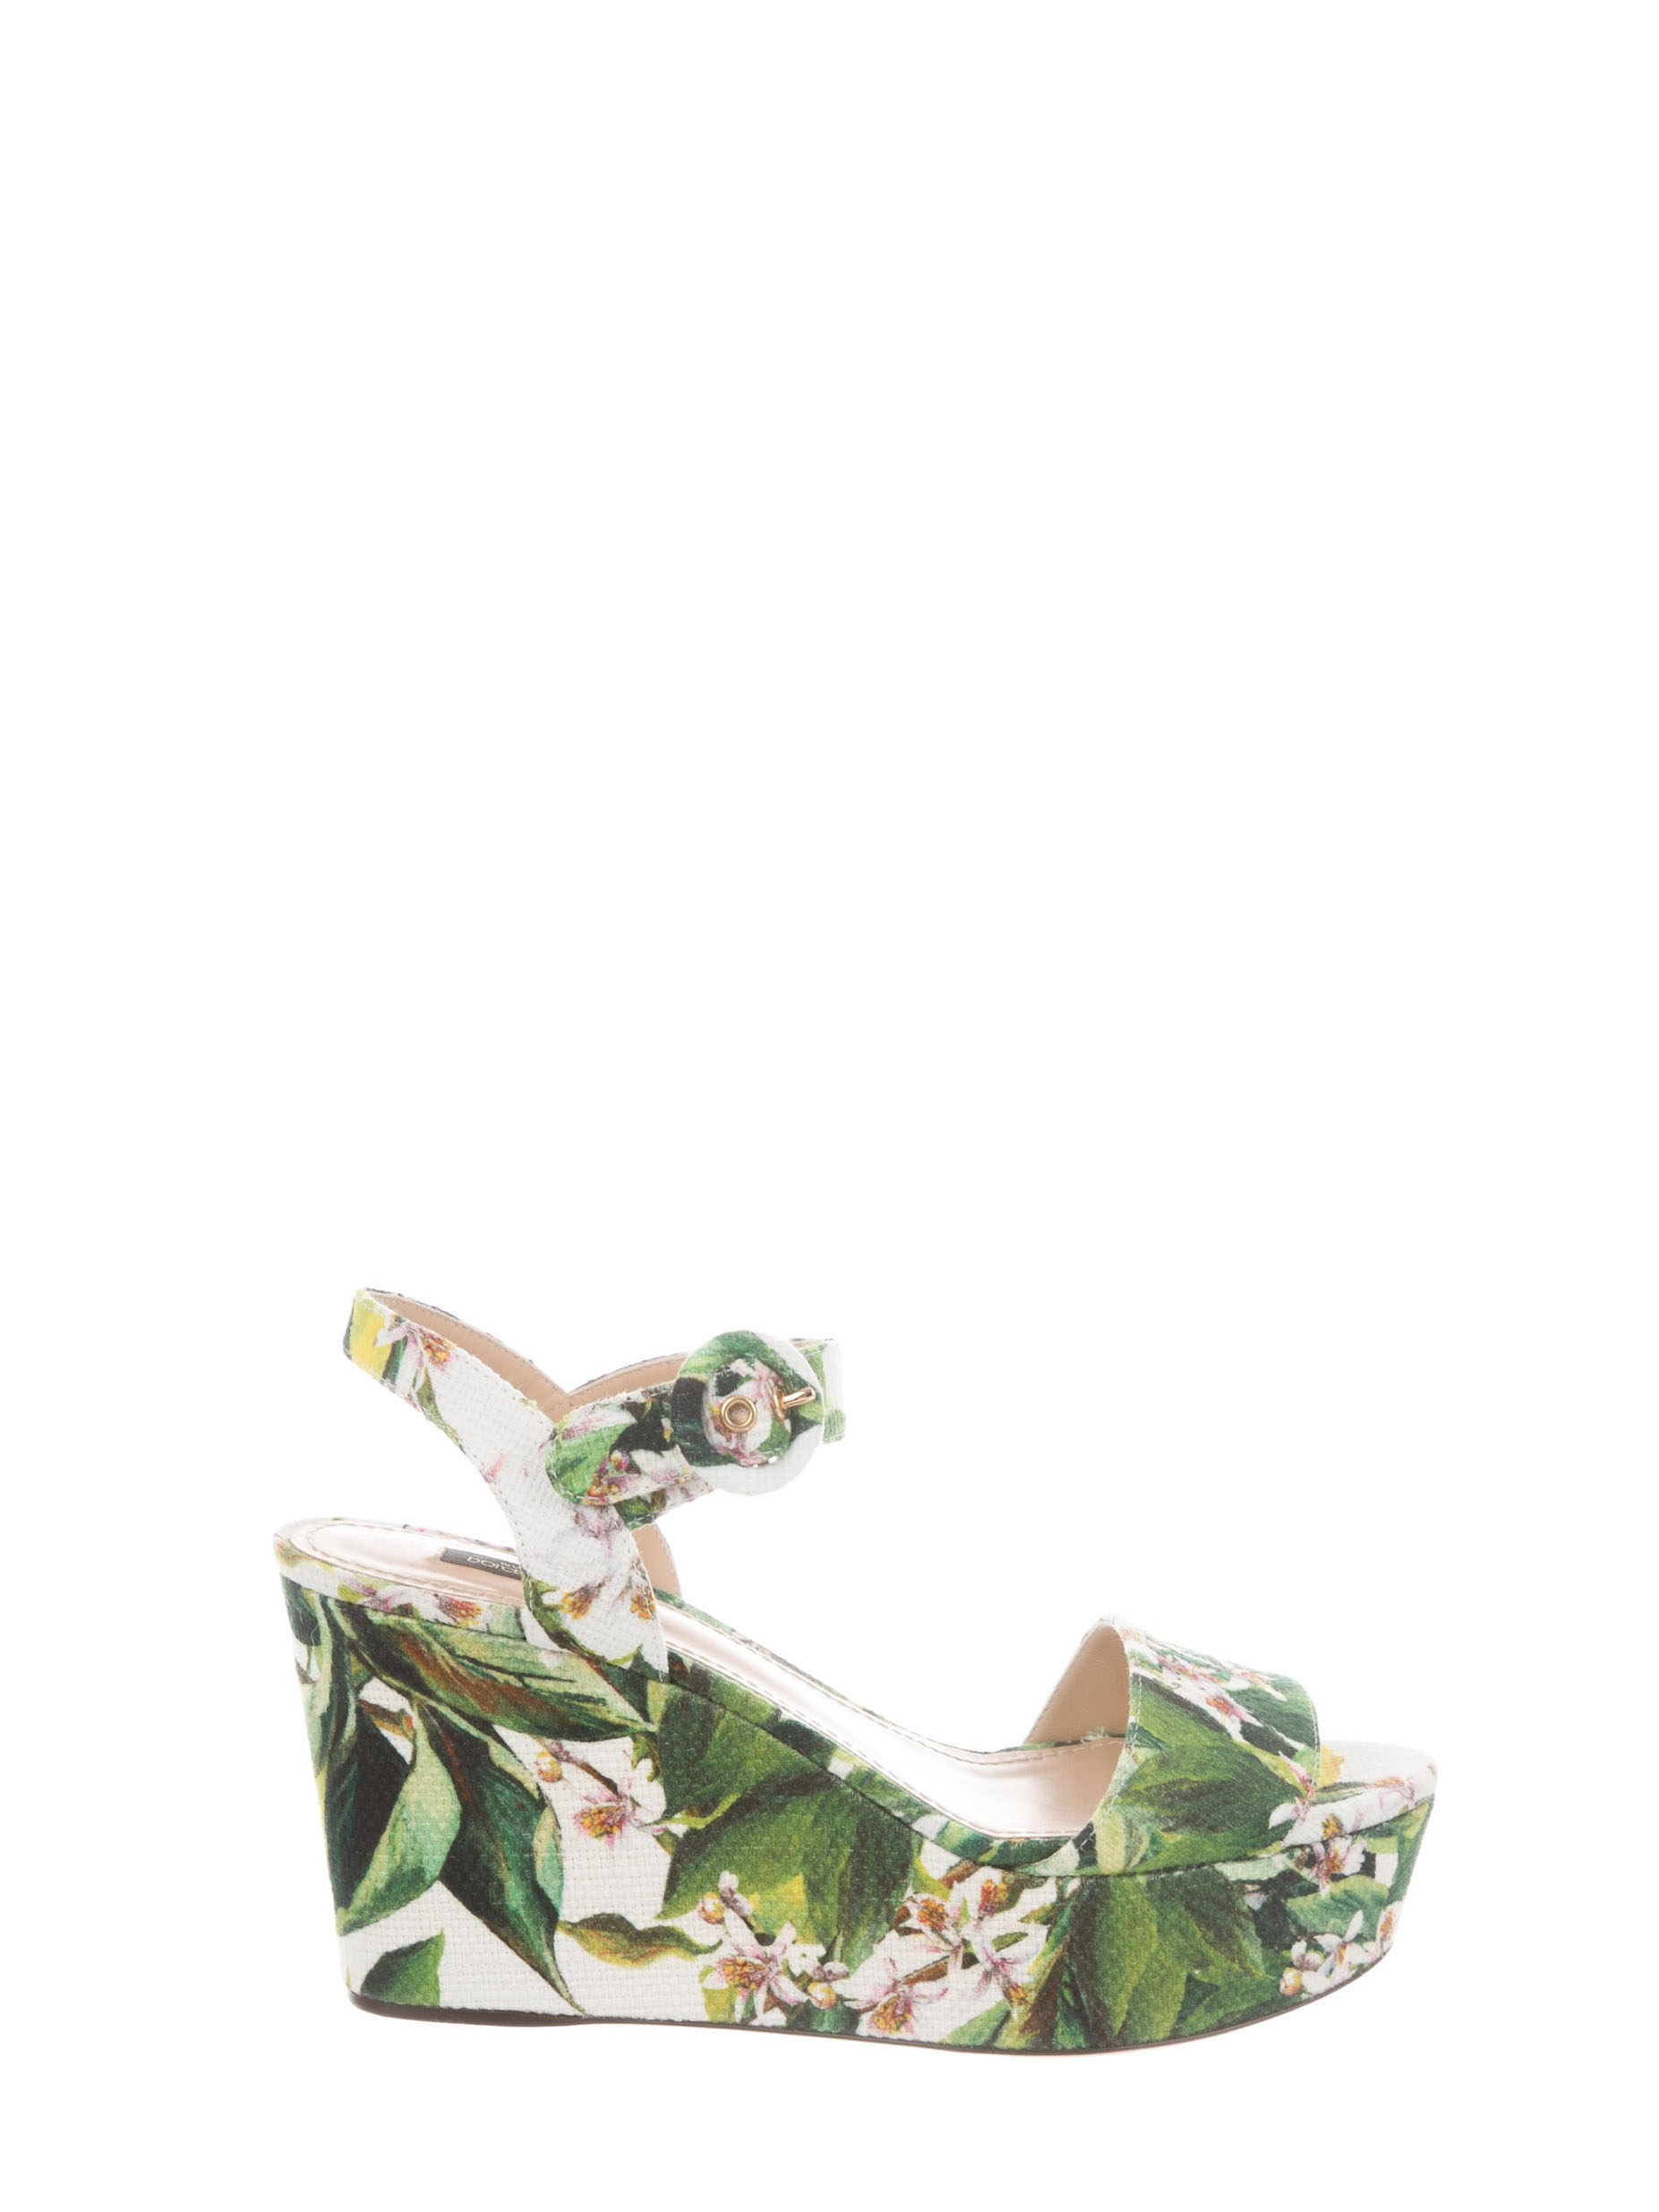 Boutique DOLCE & GABBANA Green, white and yellow lemon tree flower print  canvas BIANCA wedge sandals Size 37